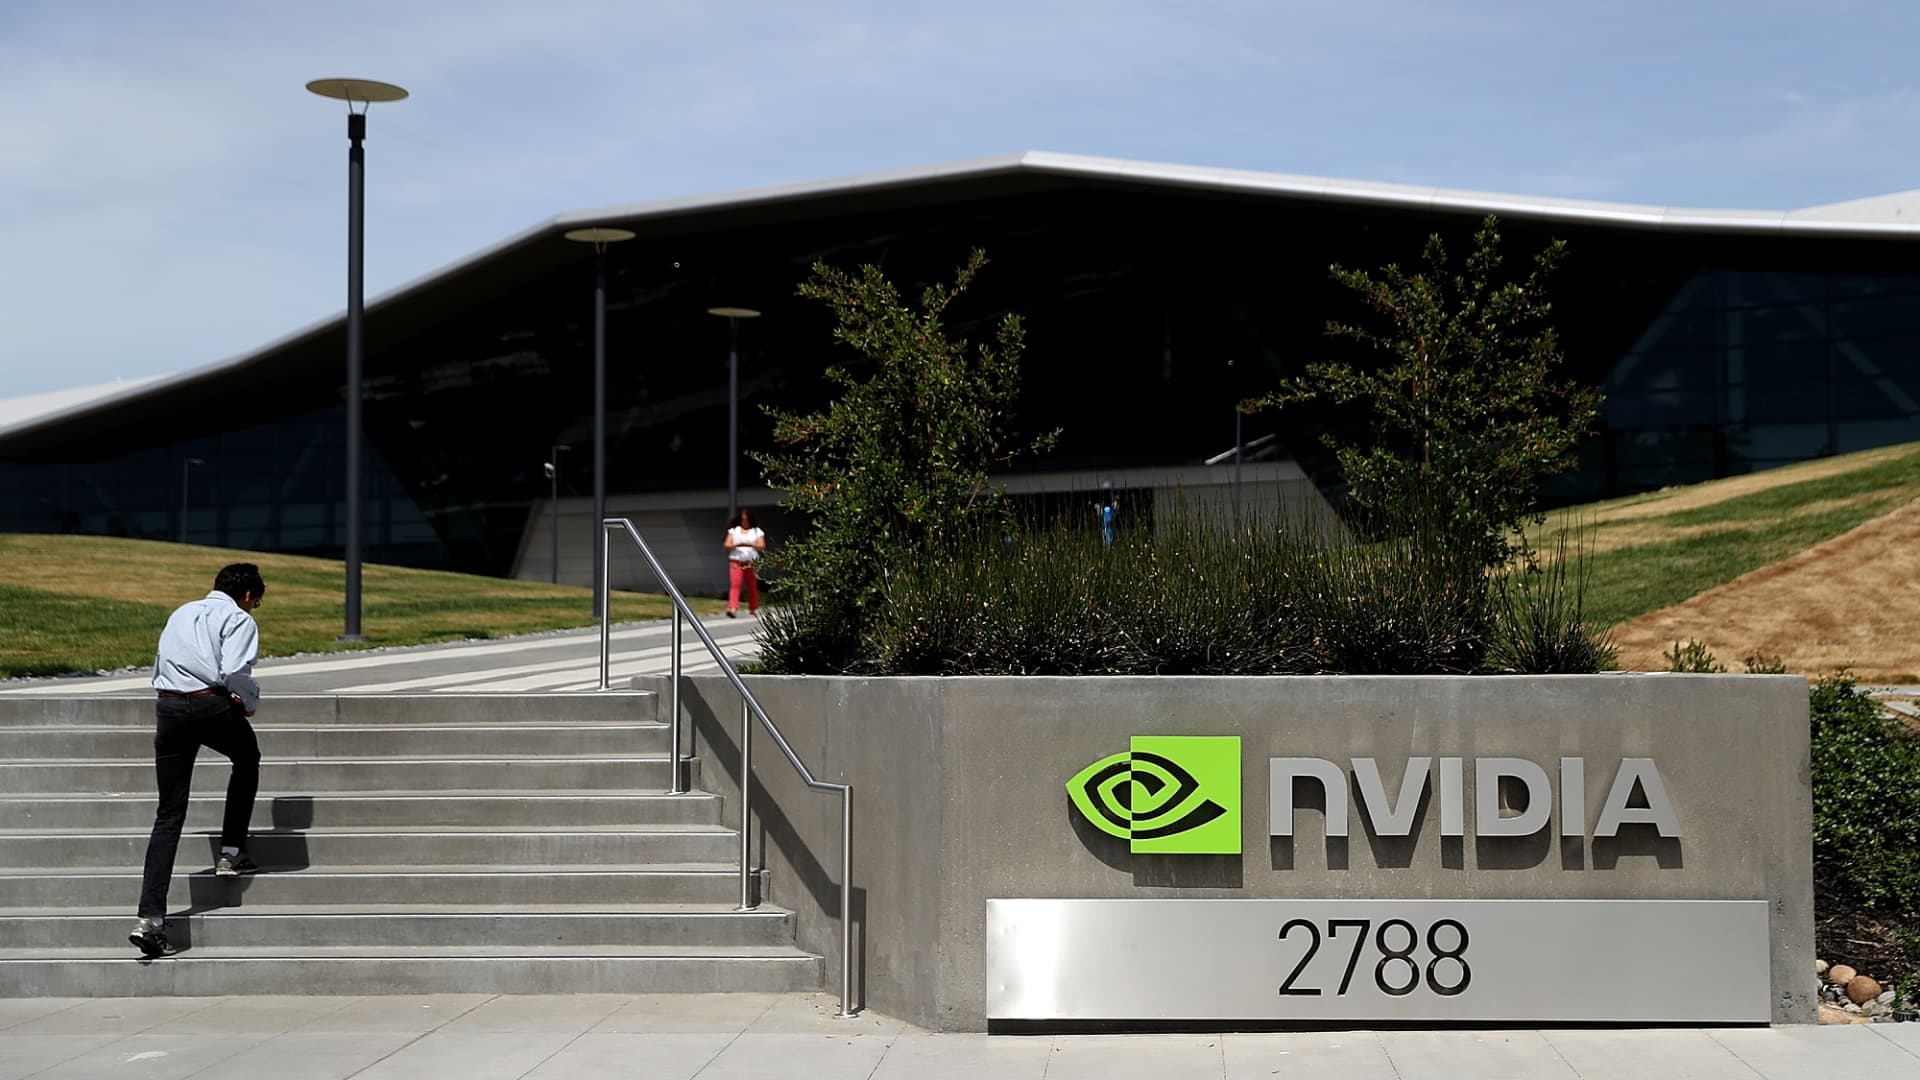 Nvidia didn’t tell investors enough about effects of crypto mining on its busine..